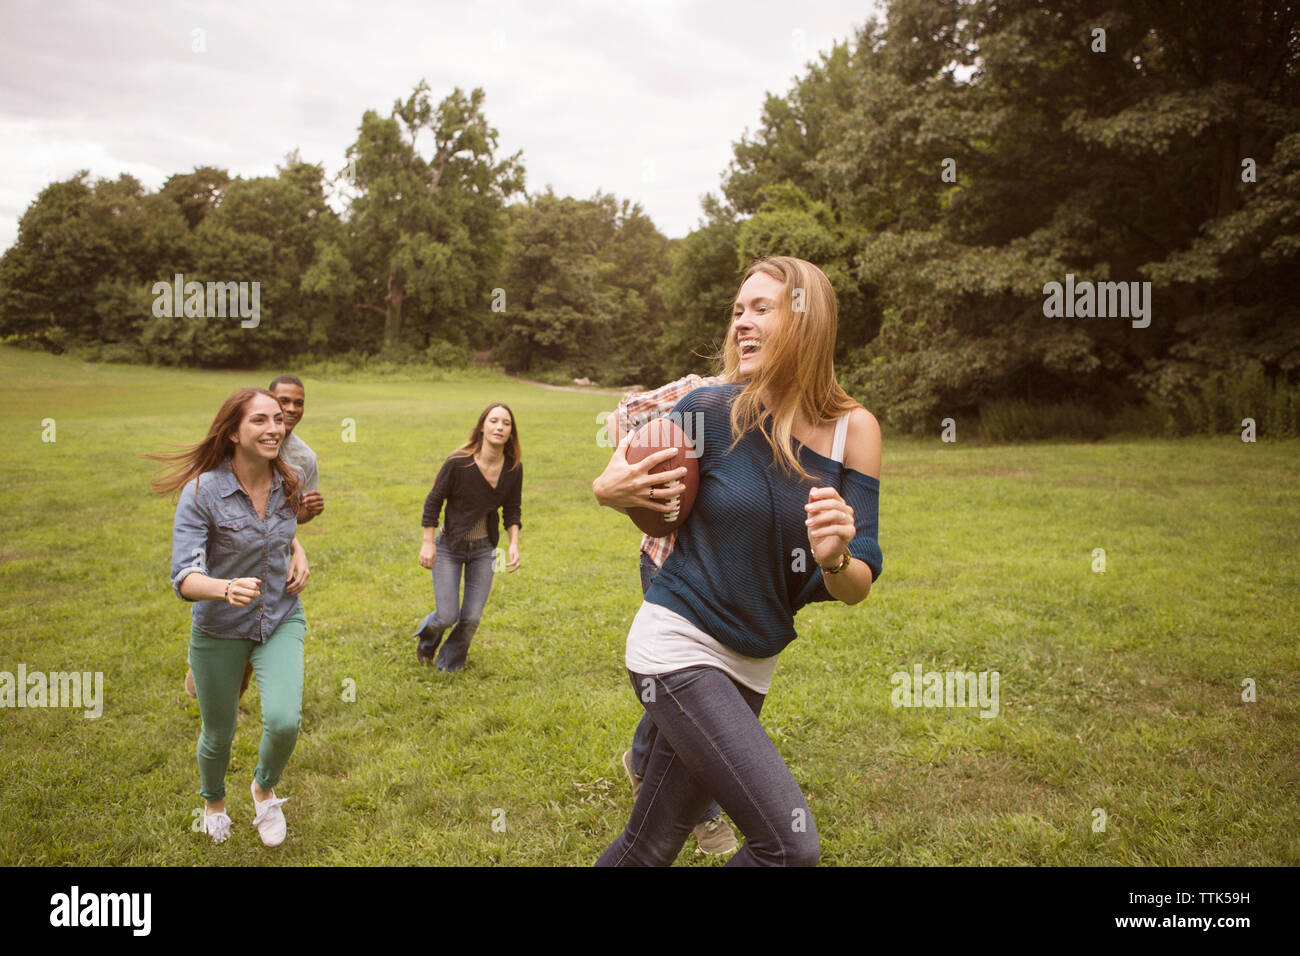 Playful friends chasing woman holding football ball on grassy field Stock Photo